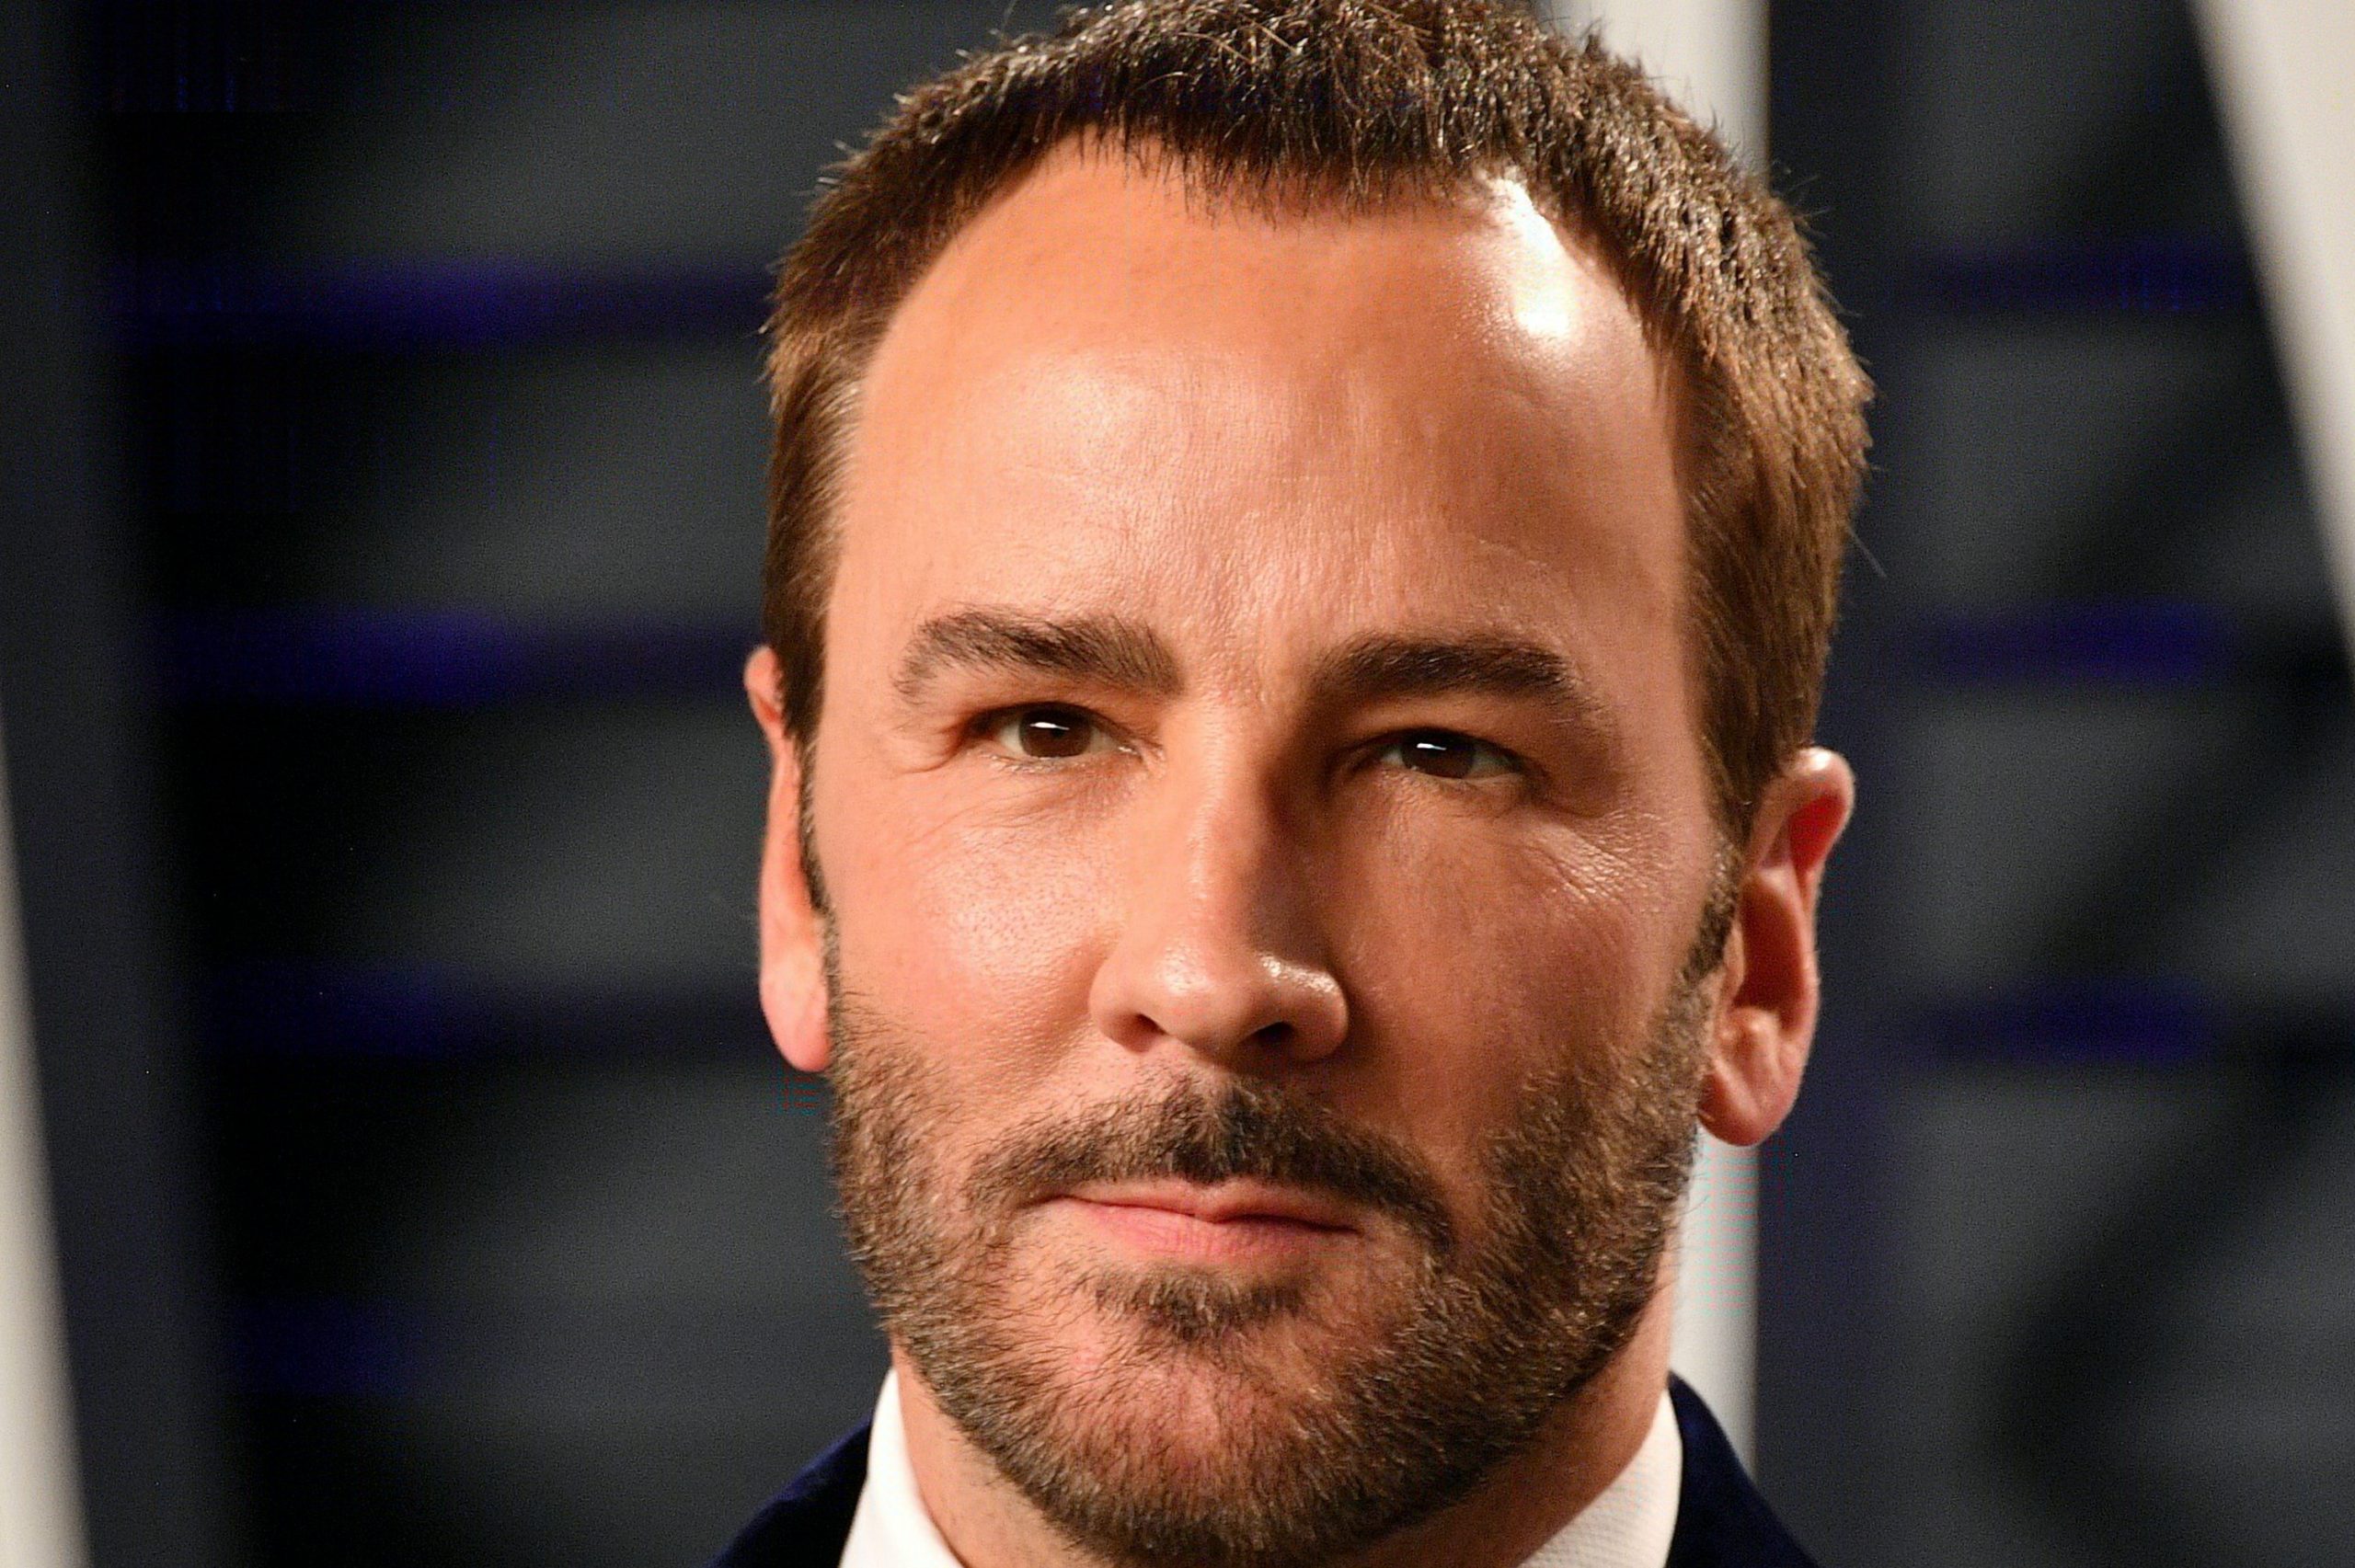 What is TOM FORD’s net worth?